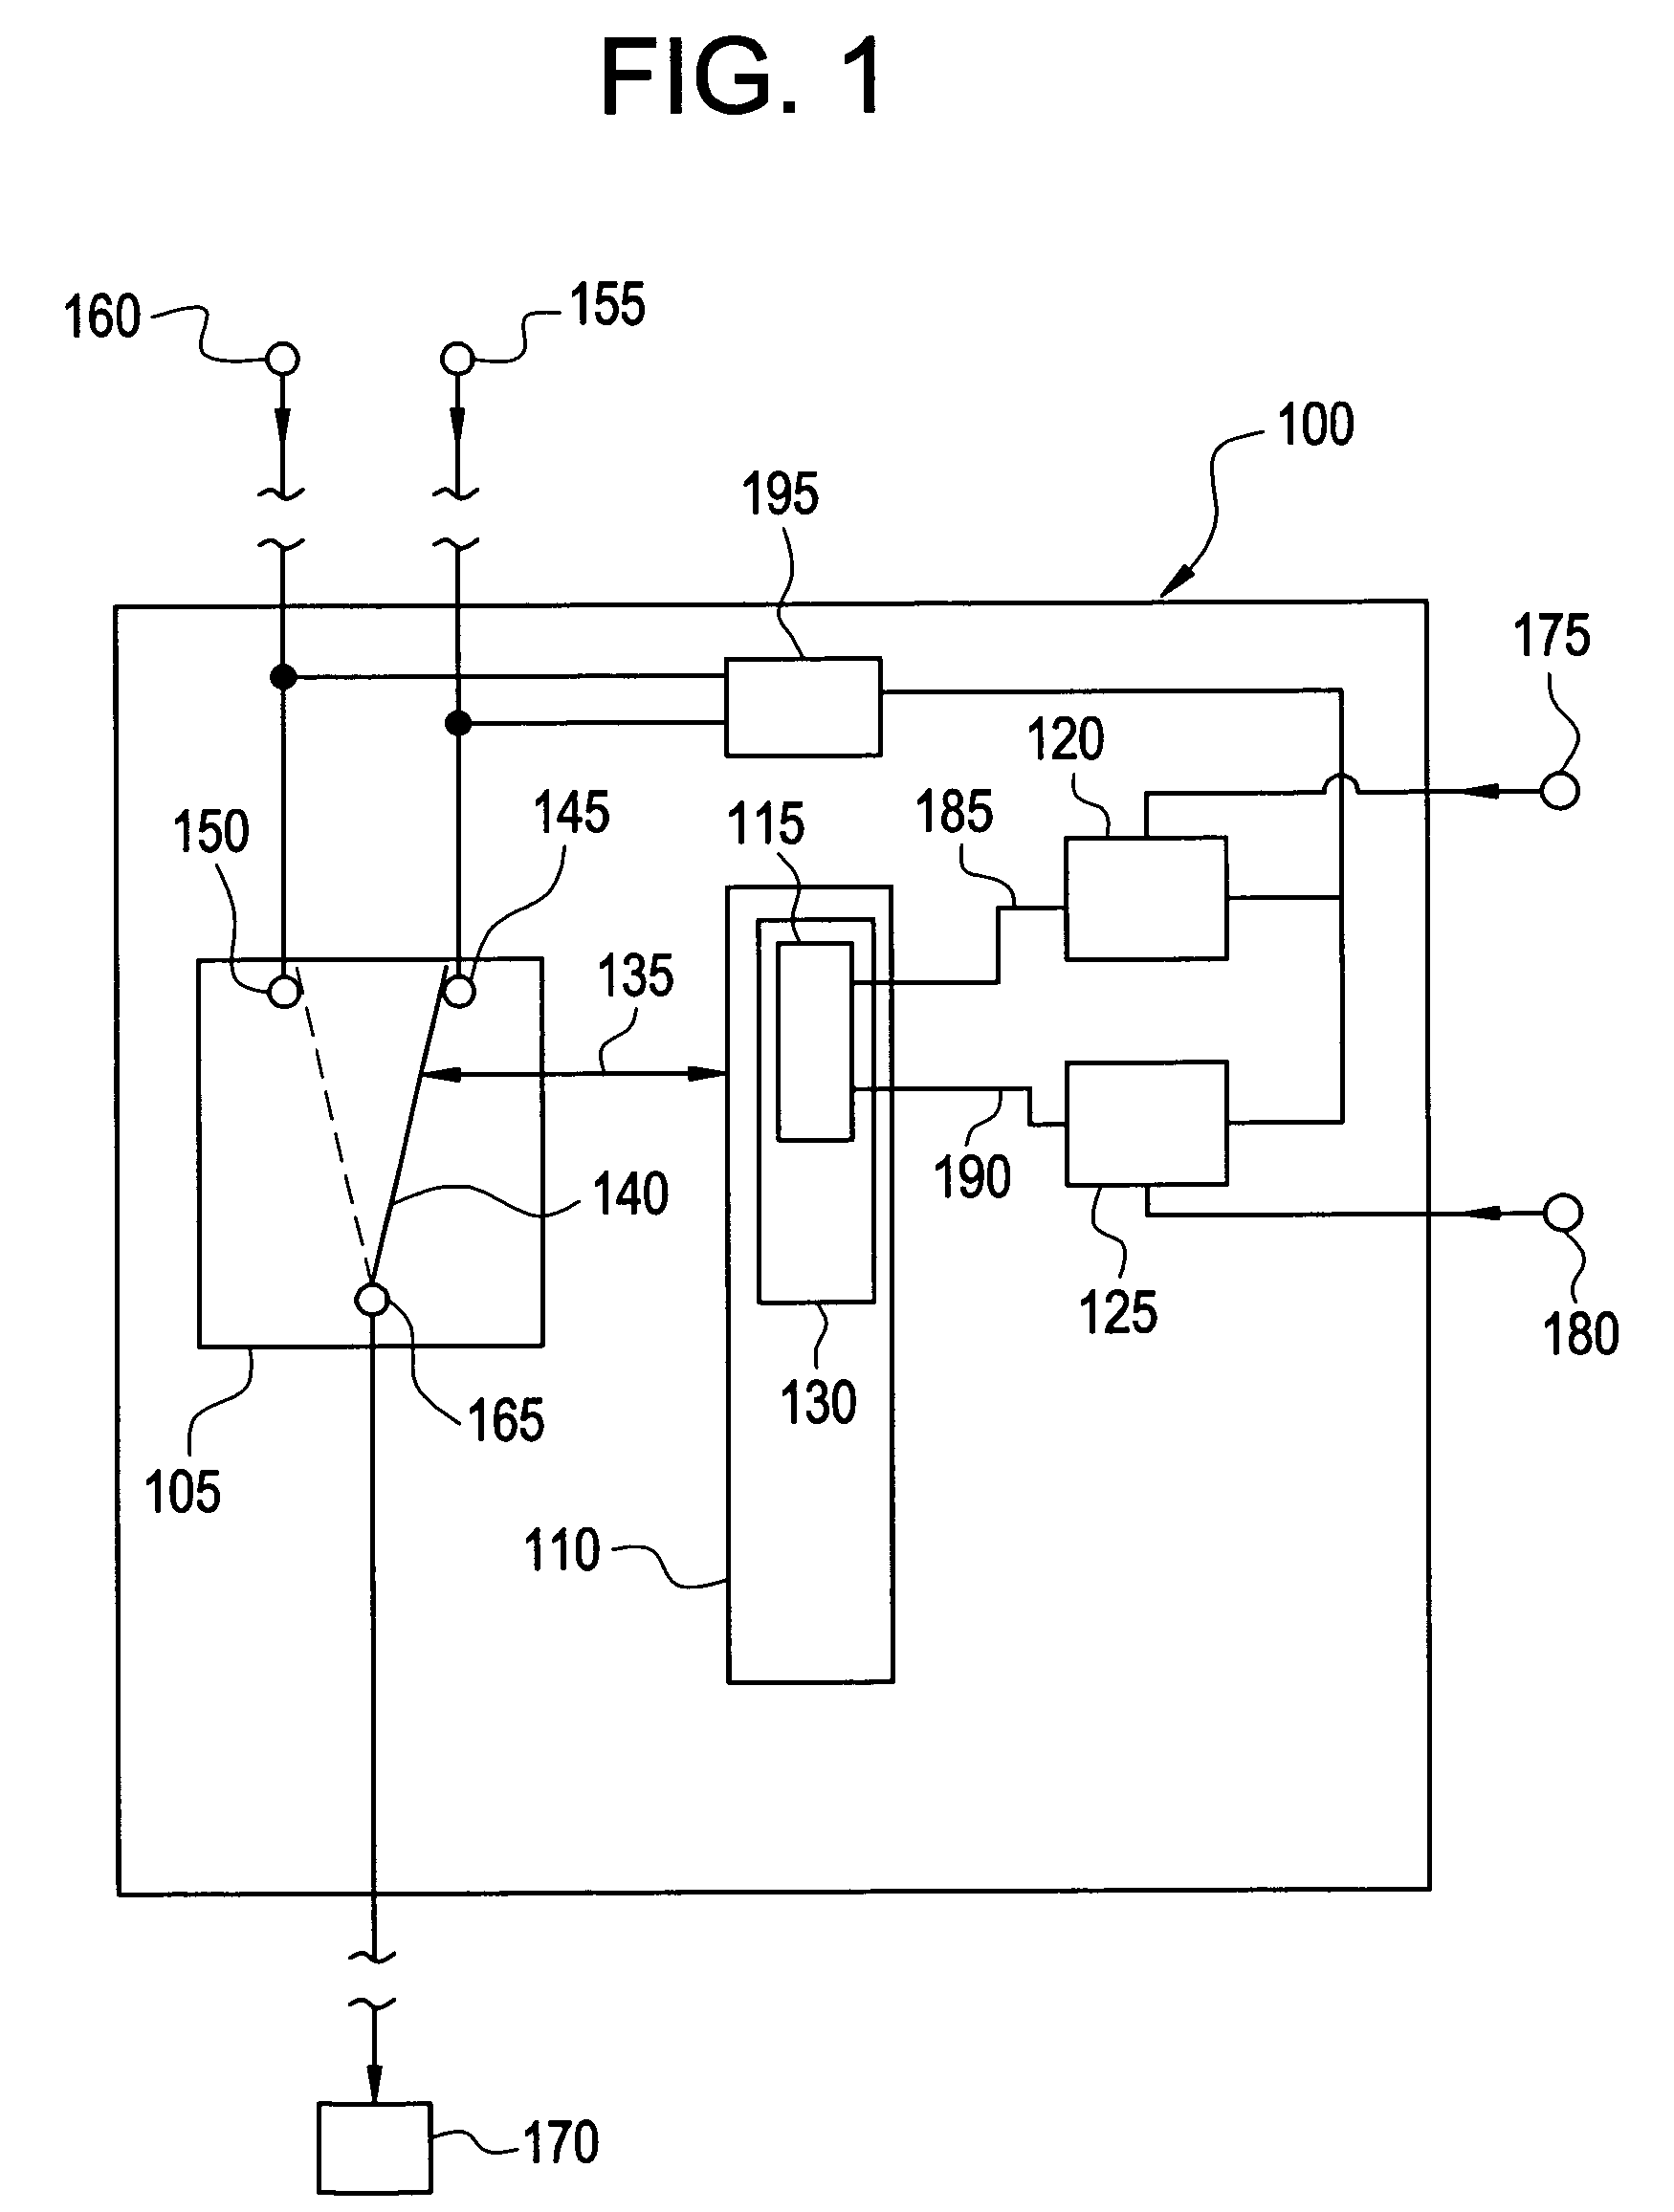 Automatic transfer switch apparatus